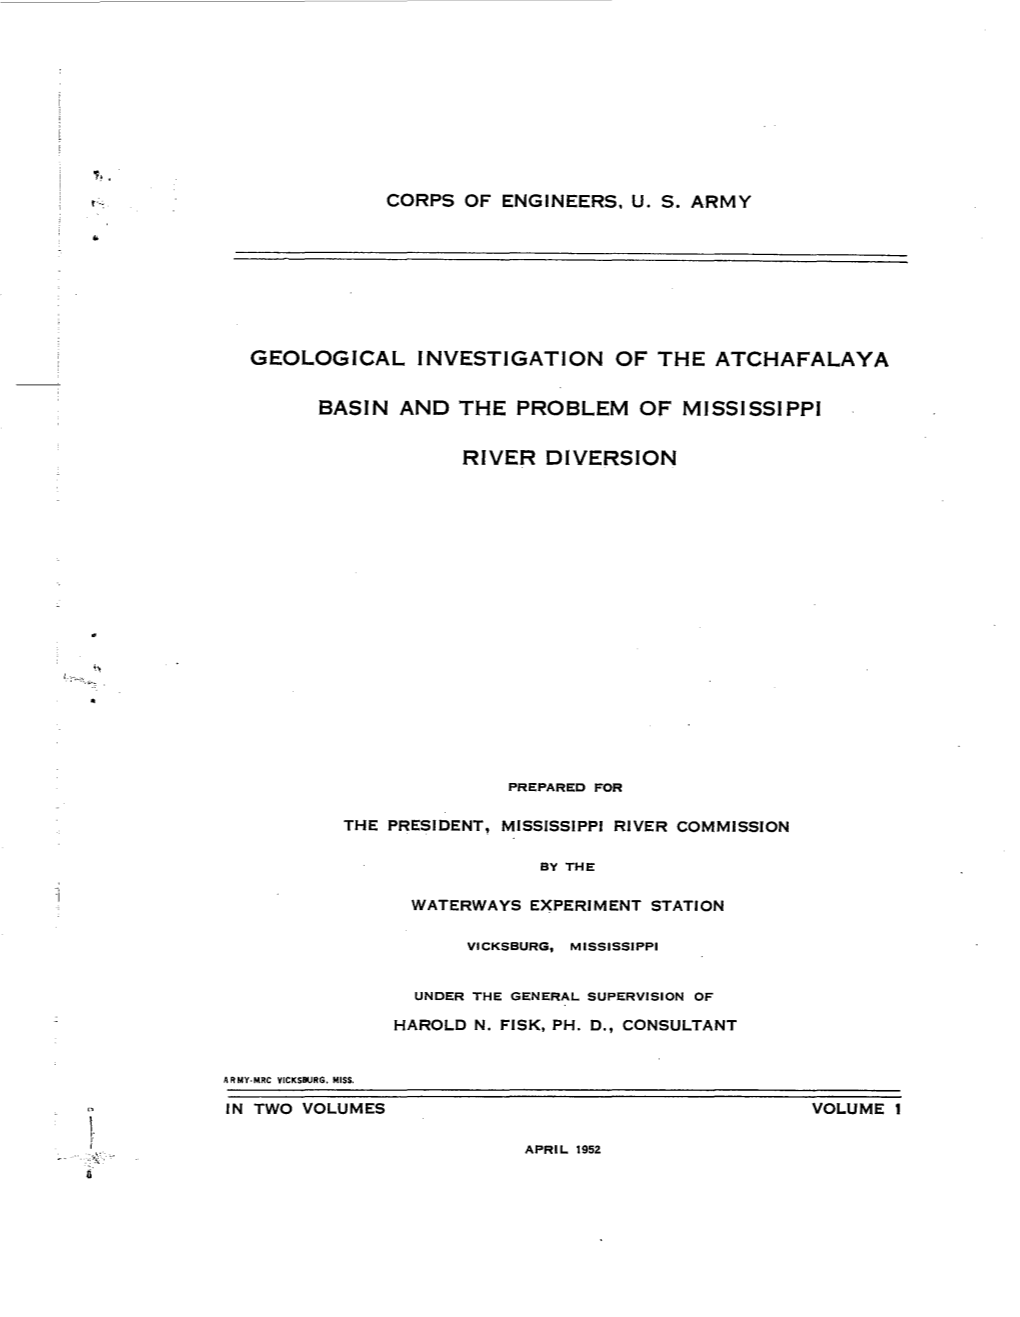 Geological Investigation of the Atchafalaya Basin and the Problem of Mississippi River Diversion '